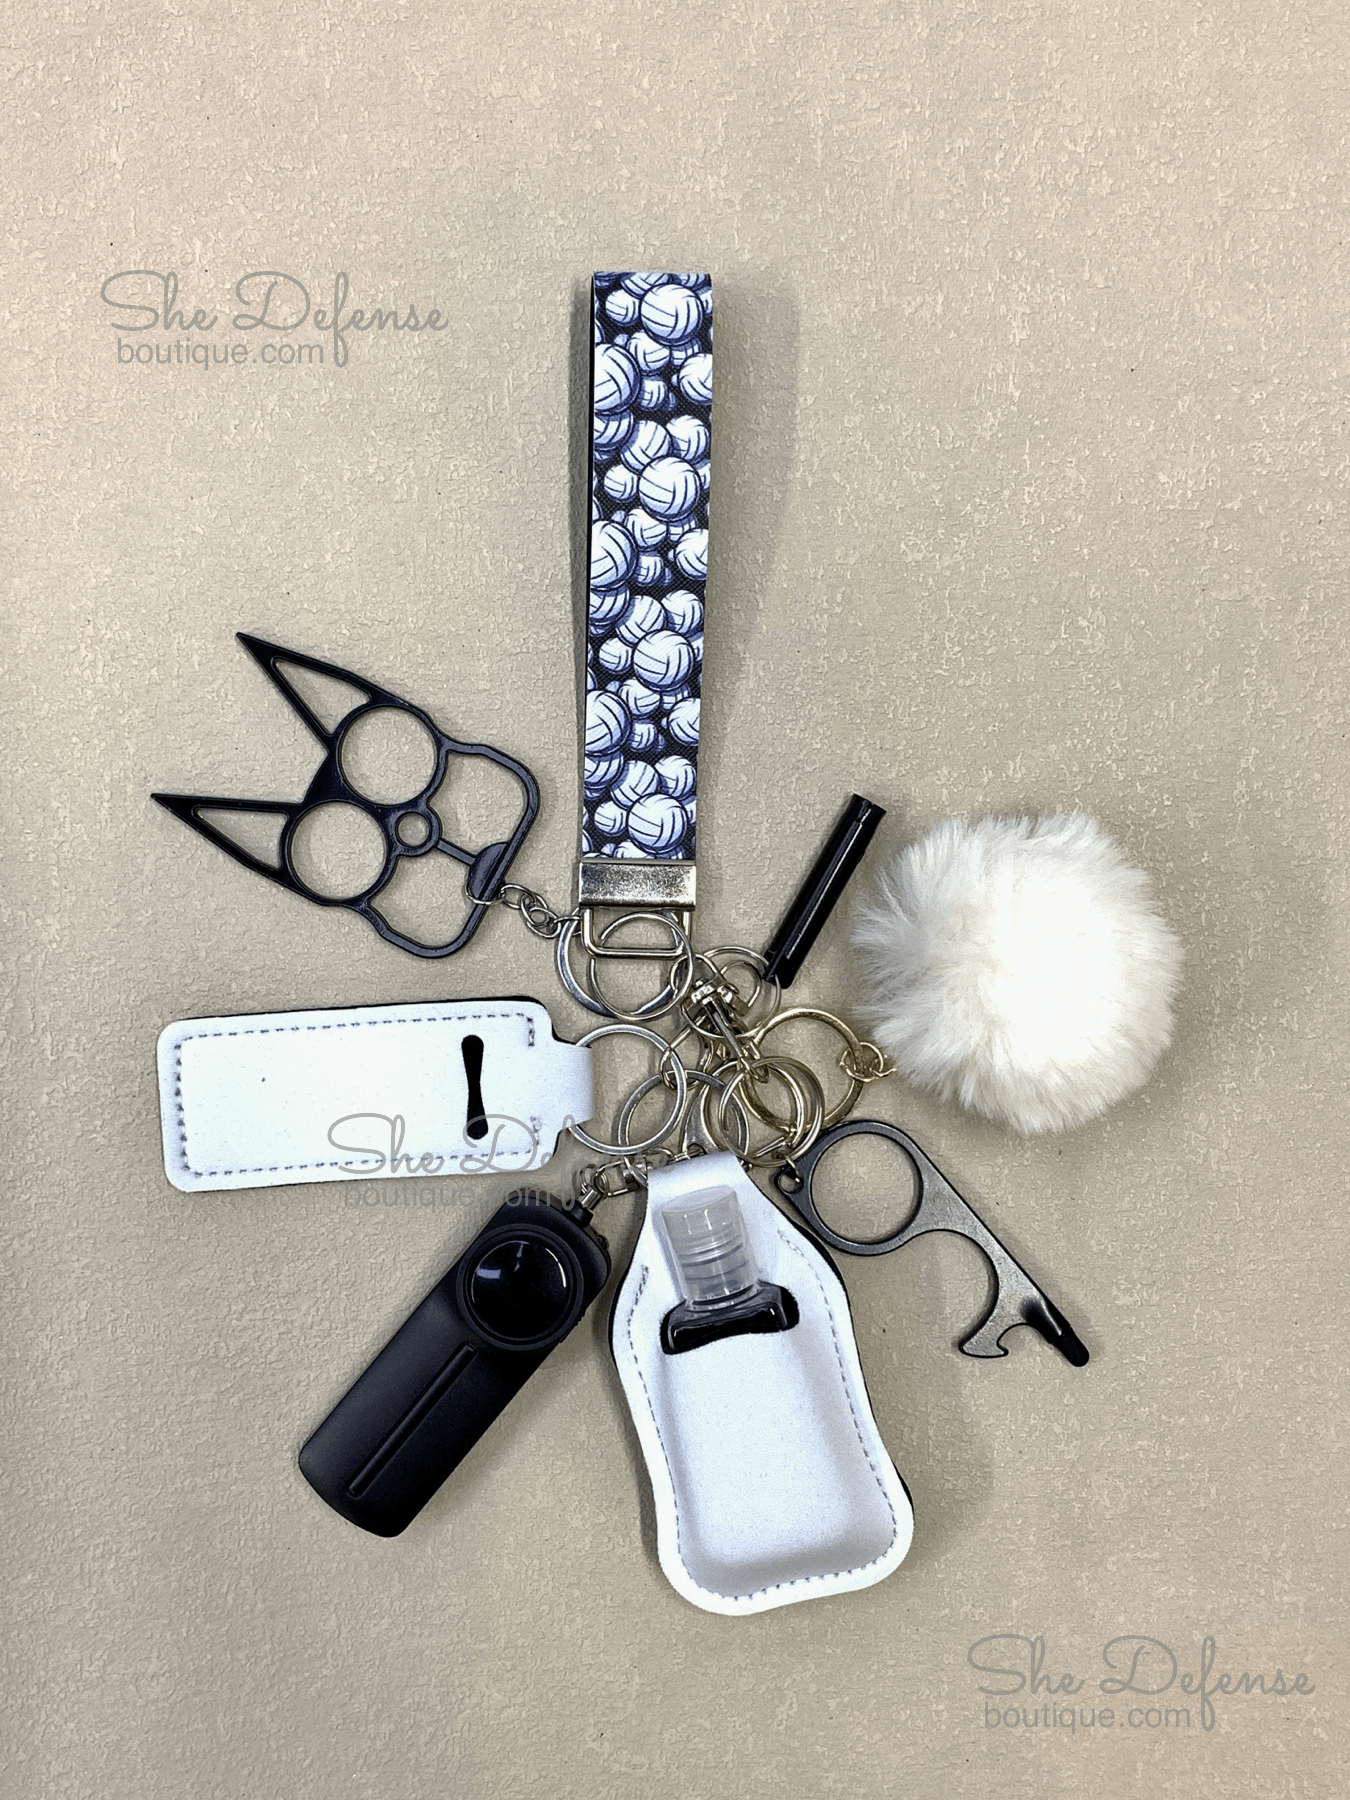 Volleyball Faux Leather Self Defense Keychain Set-She Defense Boutique